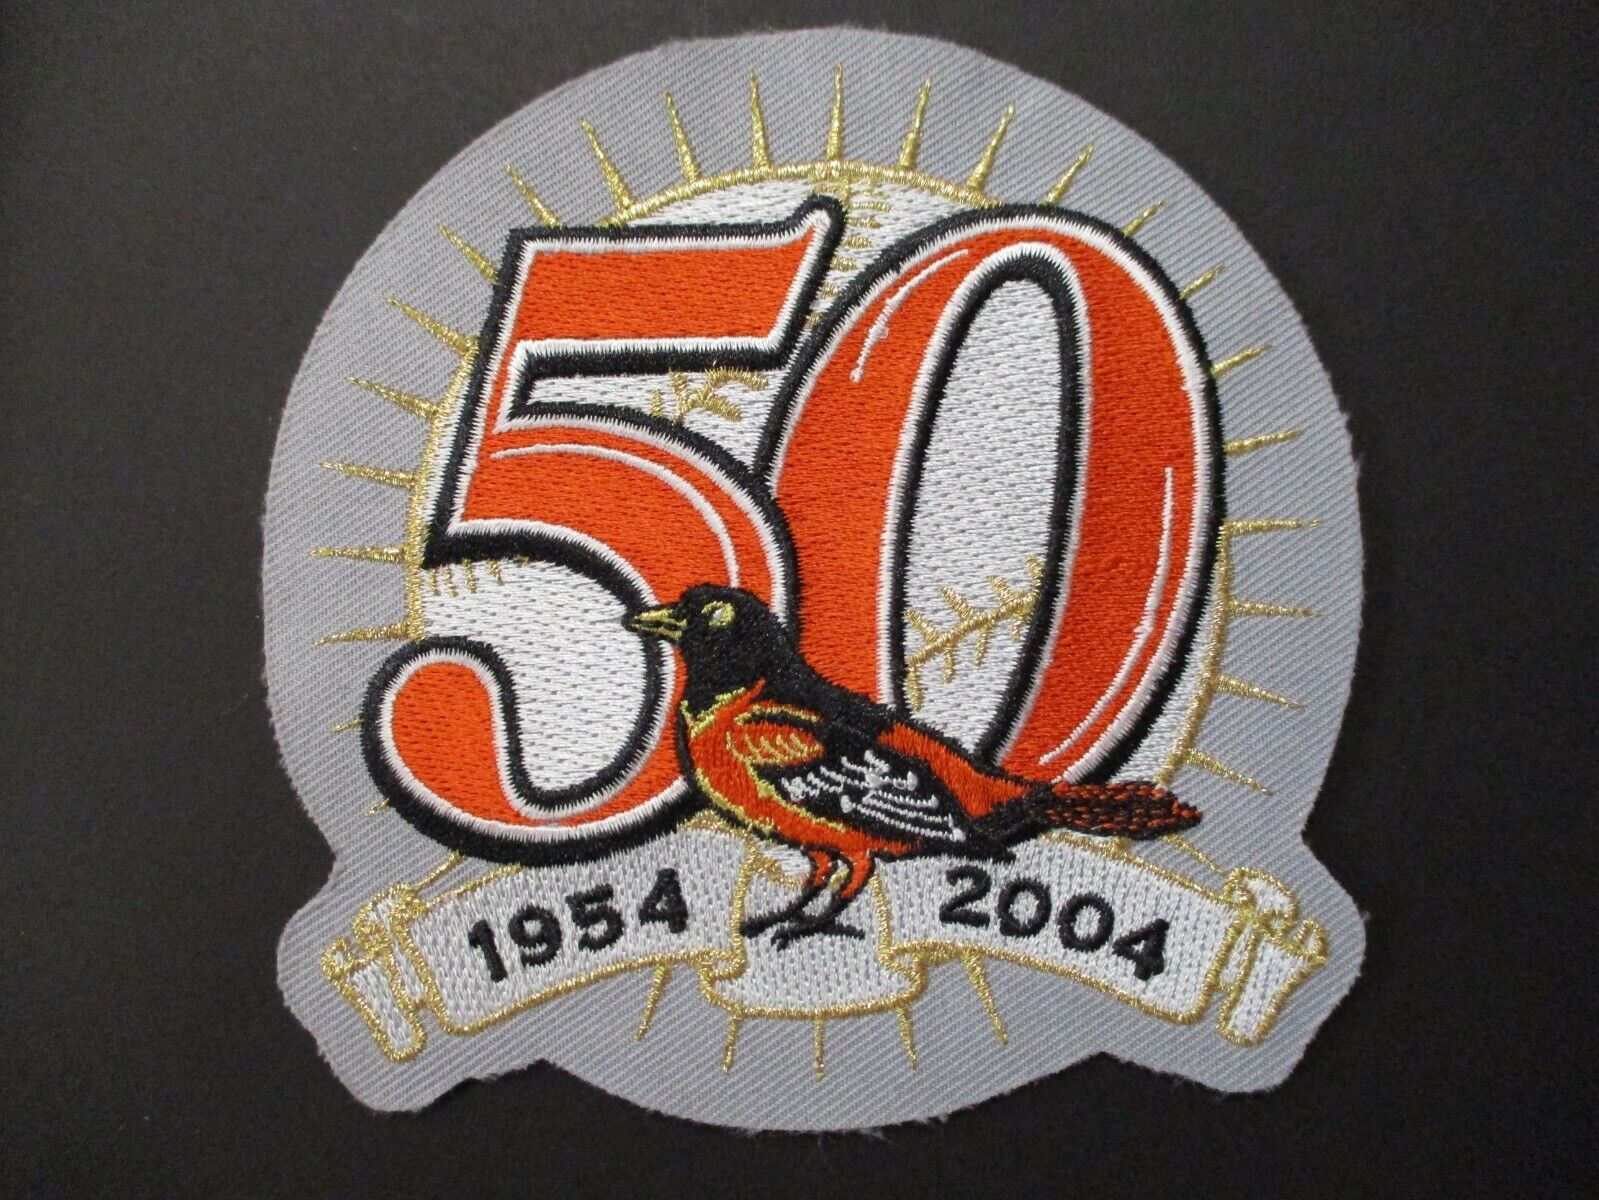 Baltimore Orioles 50th Season MLB Patch Size 4.25 x 4.5 inches